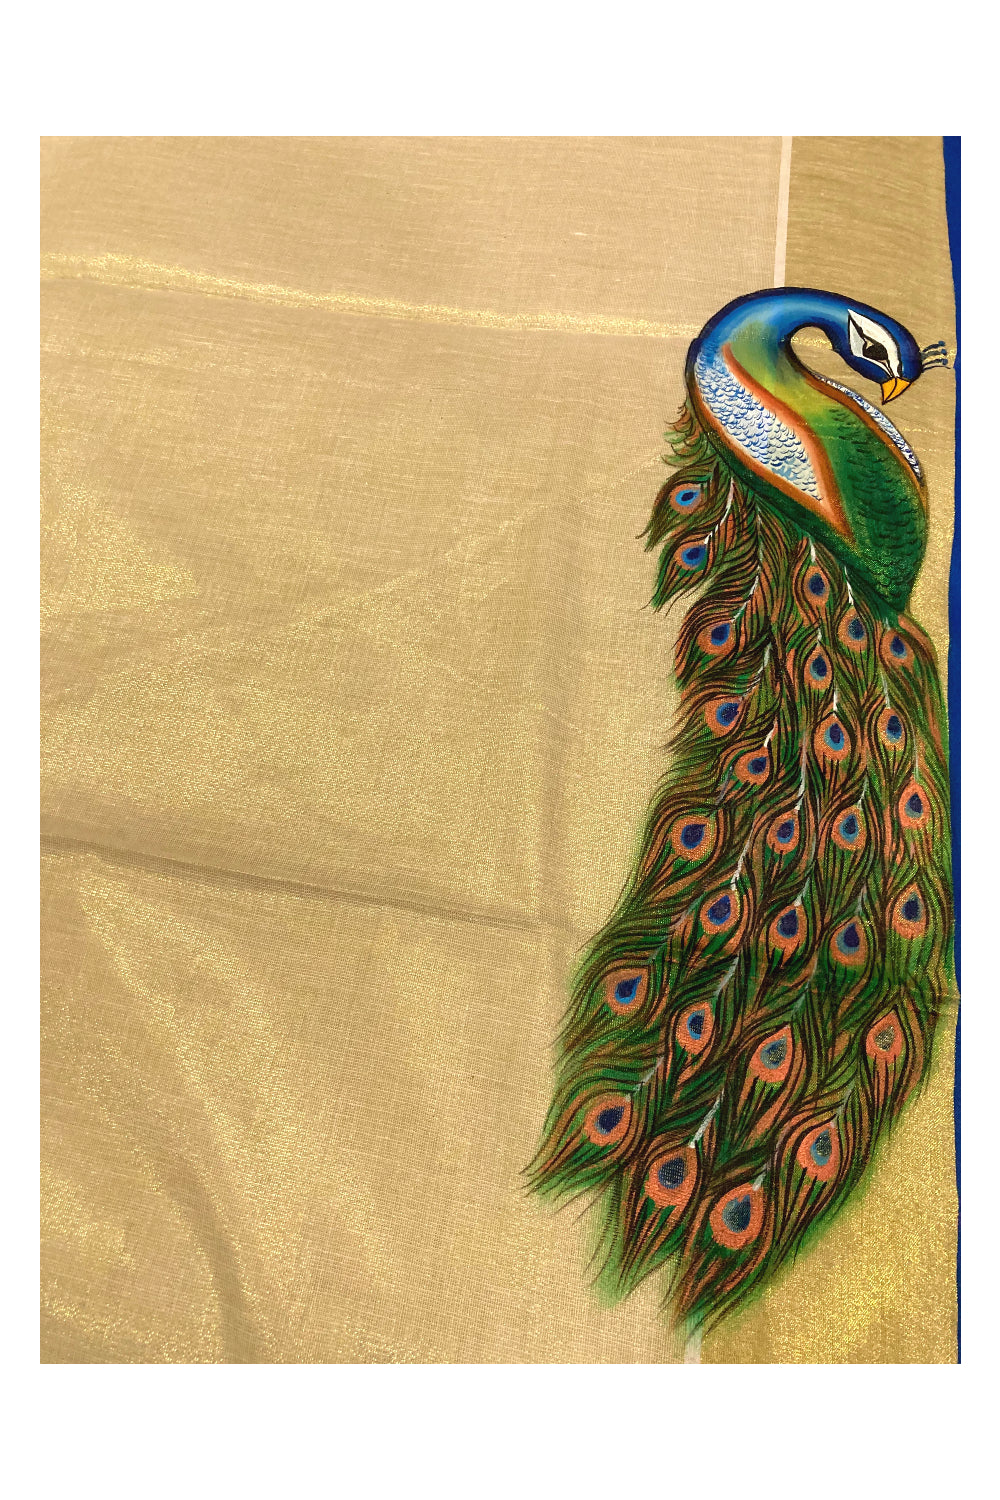 Kerala Tissue Kasavu Saree with Hand Painted Feather Design and Blue on Border